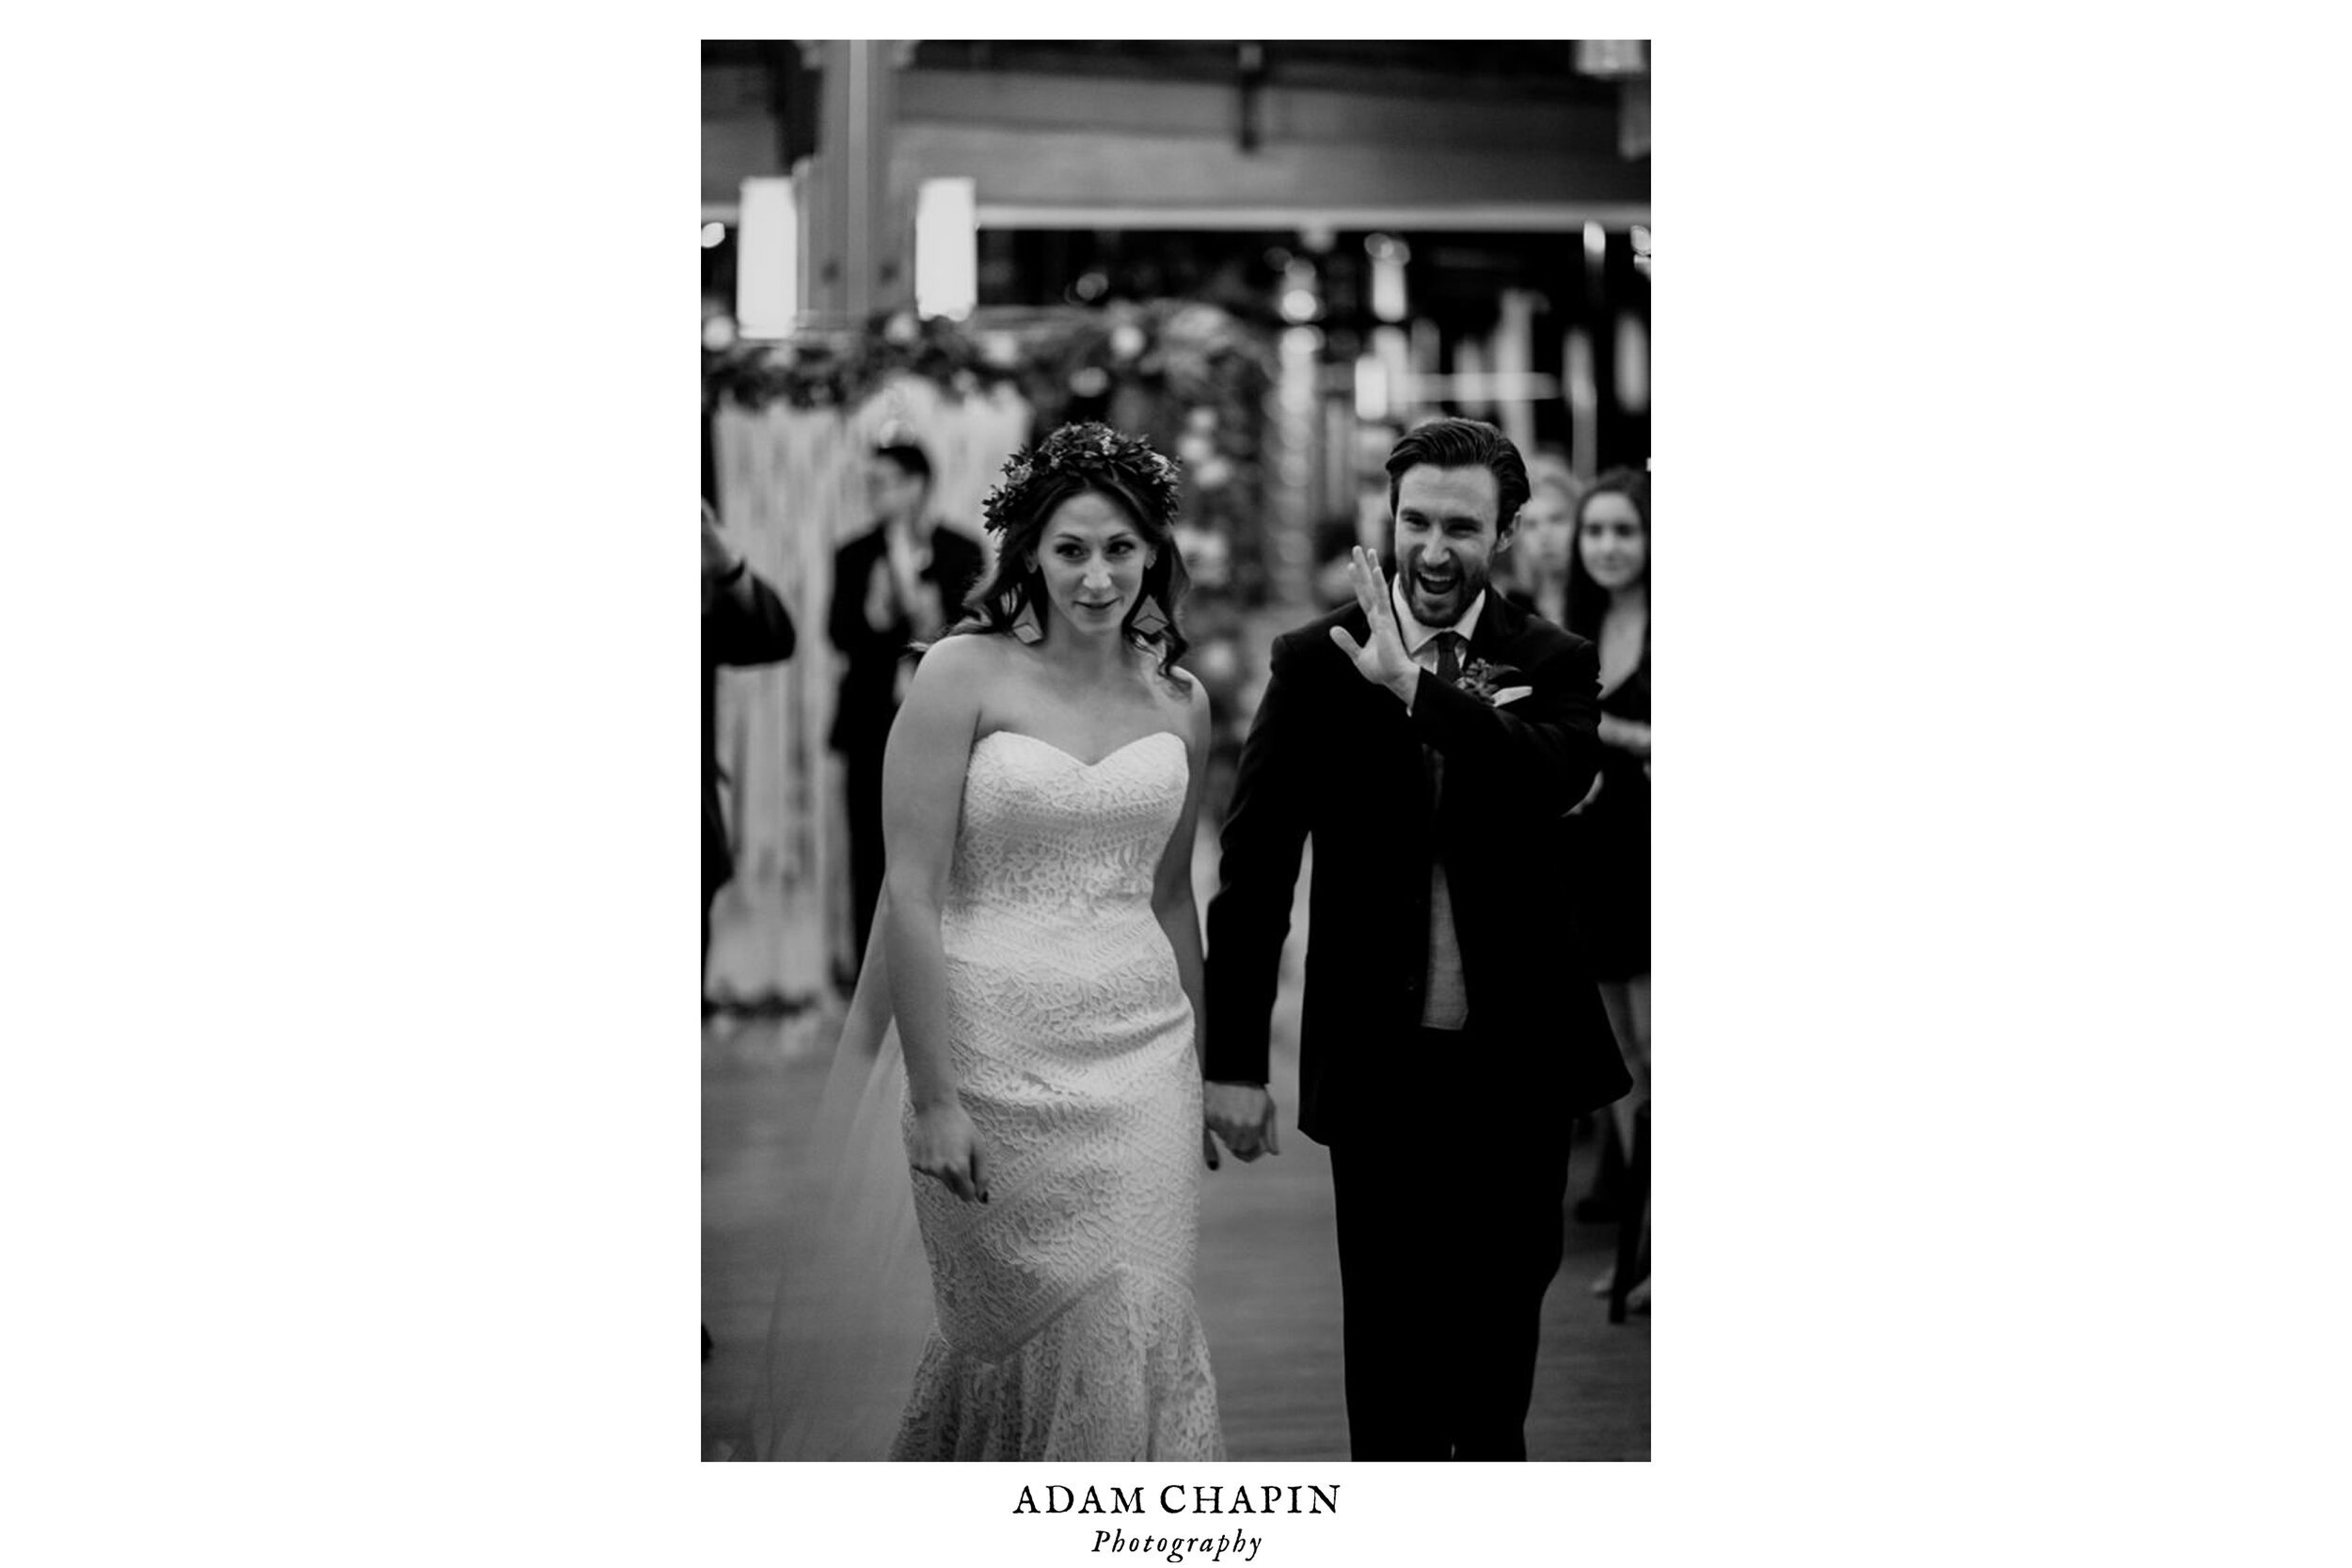 the bride and groom happily walking back during their recessional after their ceremony